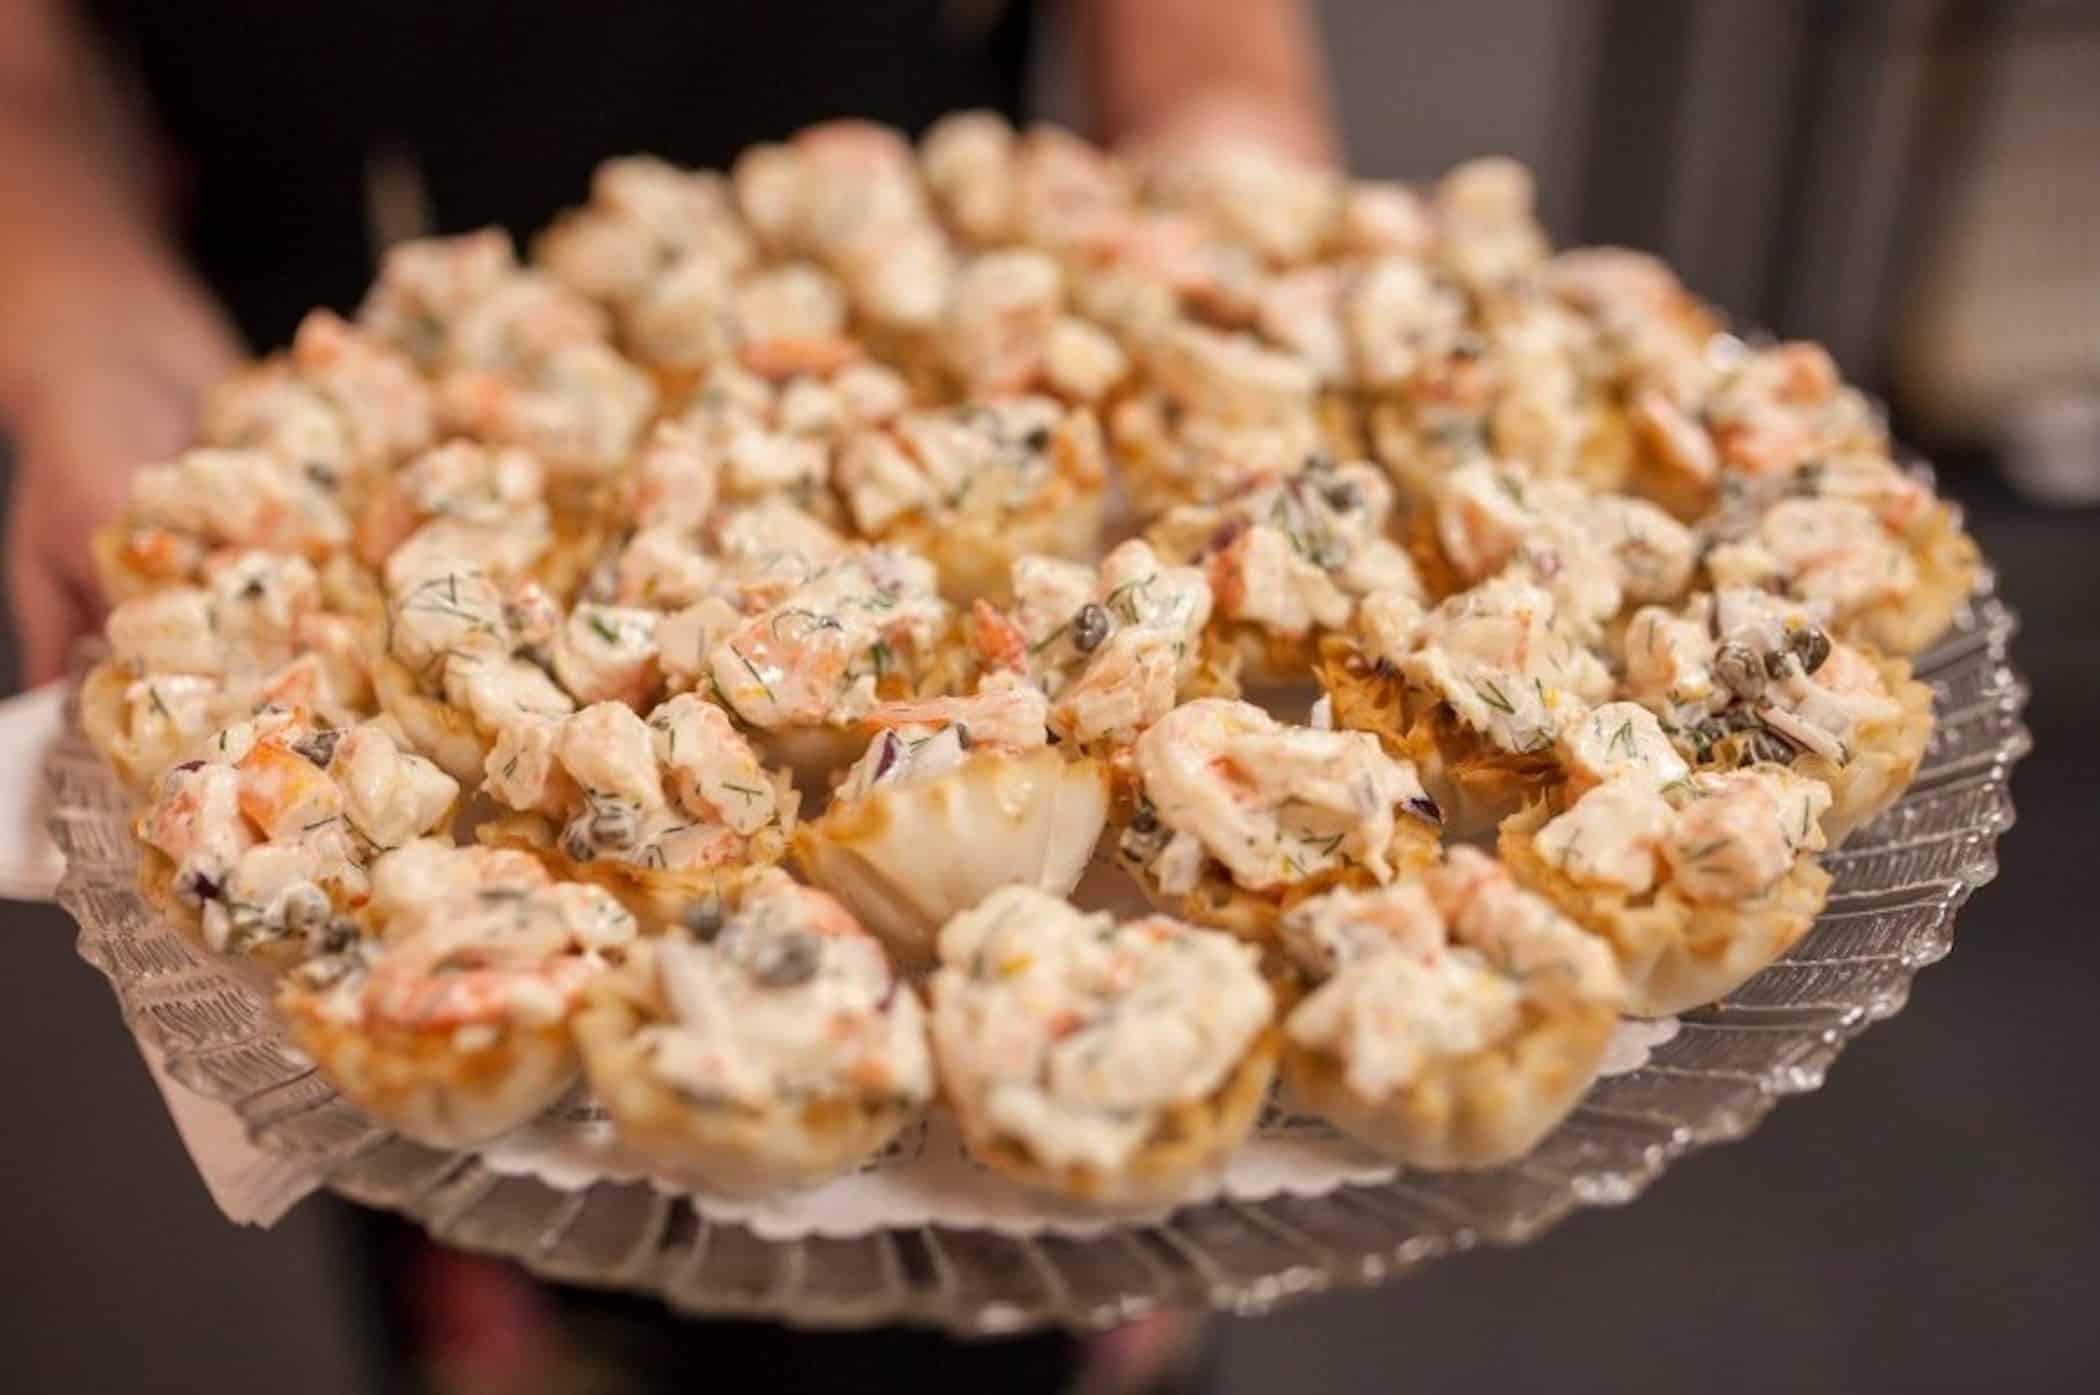 Pastry shell filled with your choice of Shrimp Remoulade or Orange-Dill Shrimp.